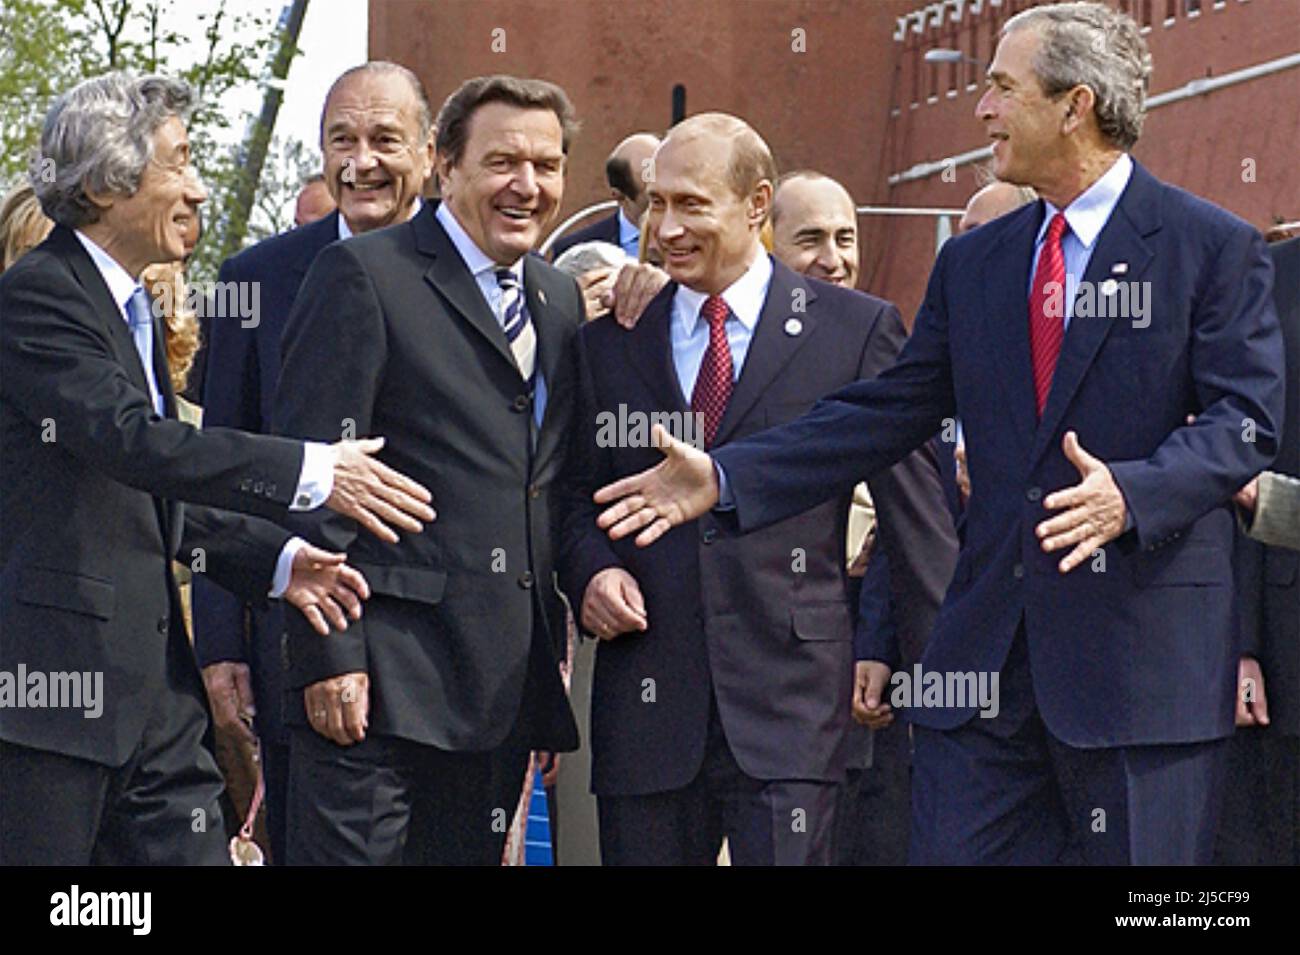 VLADIMIR PUTIN, Russian President, in Moscow during the Victory Day Parade 9 May 2005 with from left Junichiro Koizumi, Jacques Chirac and George W. Bush. Stock Photo